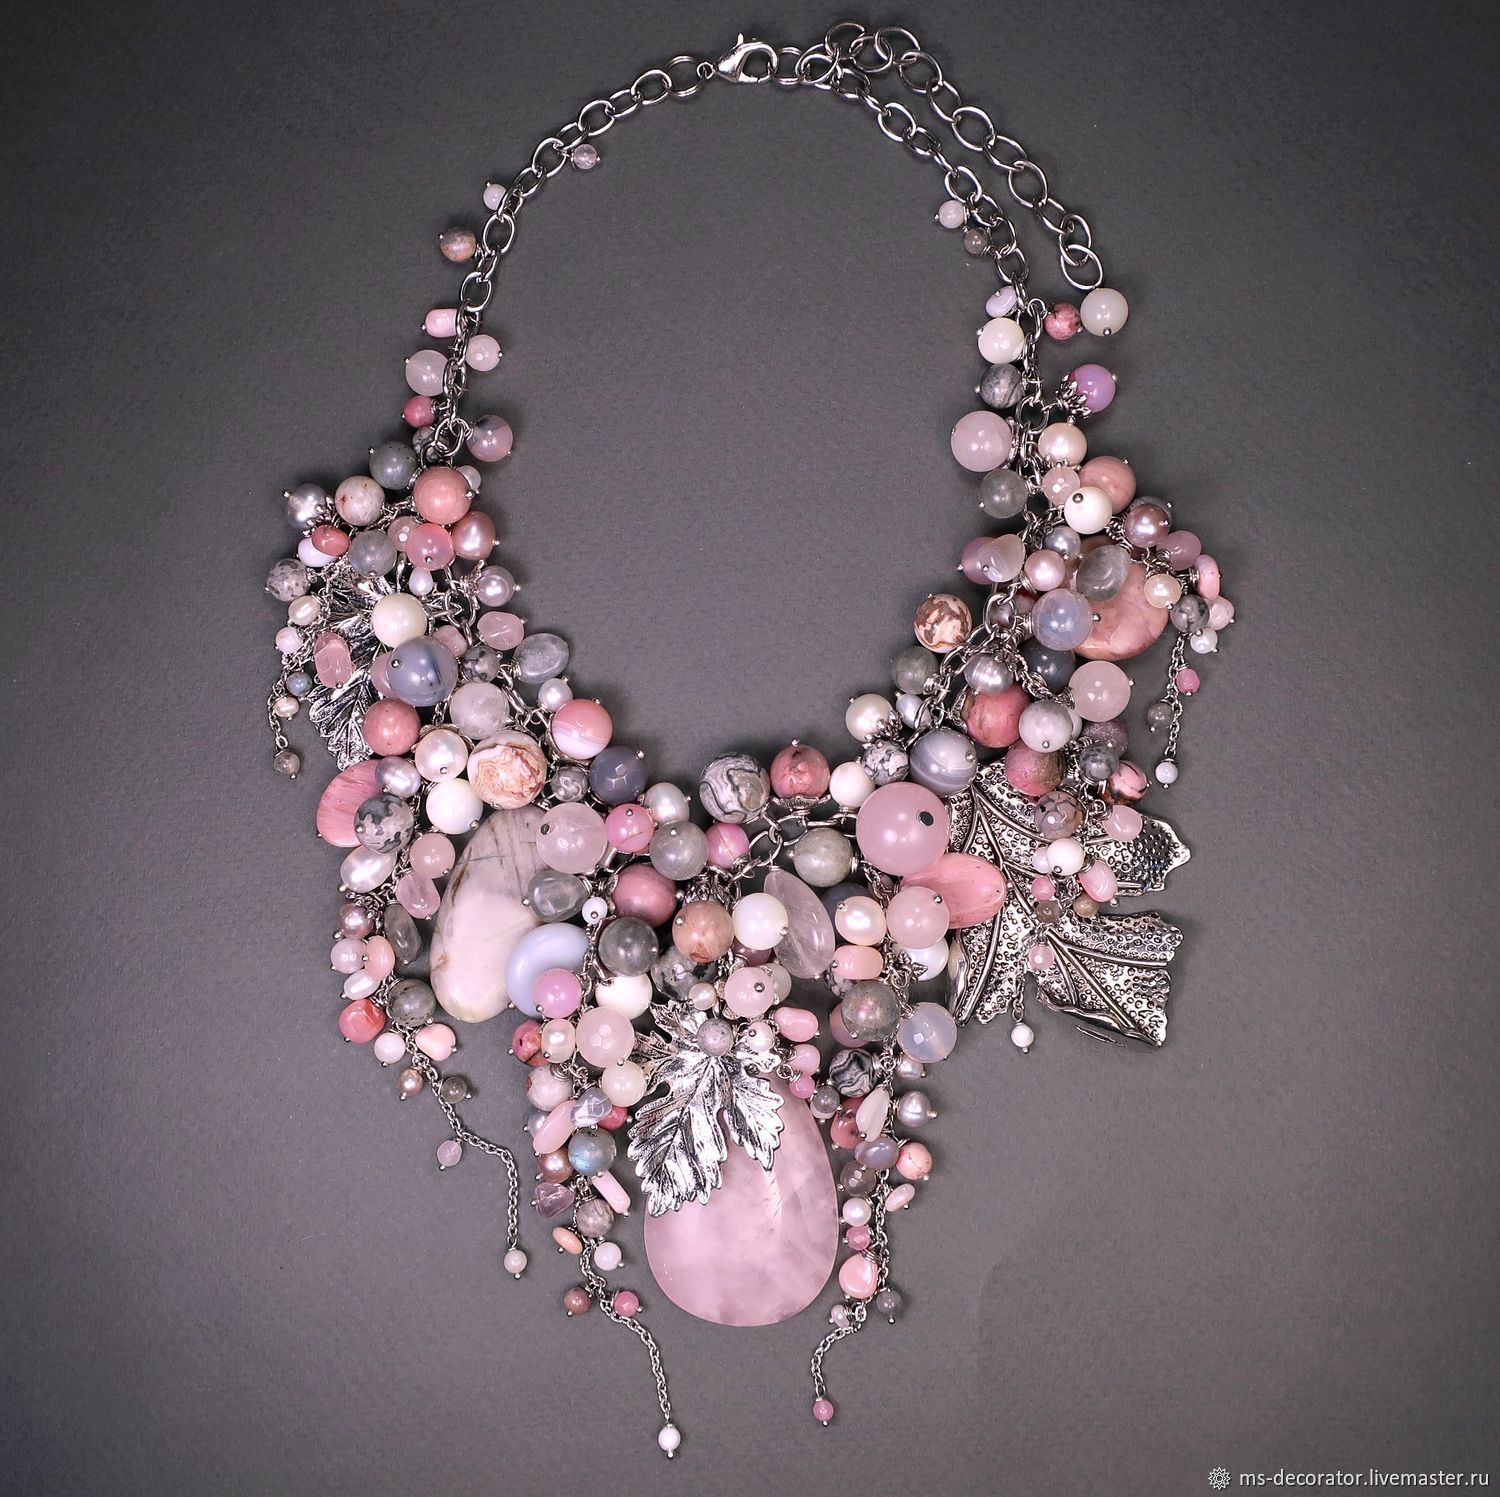 Angel of Early Morning Necklace made of natural stones and pearls, Necklace, St. Petersburg,  Фото №1